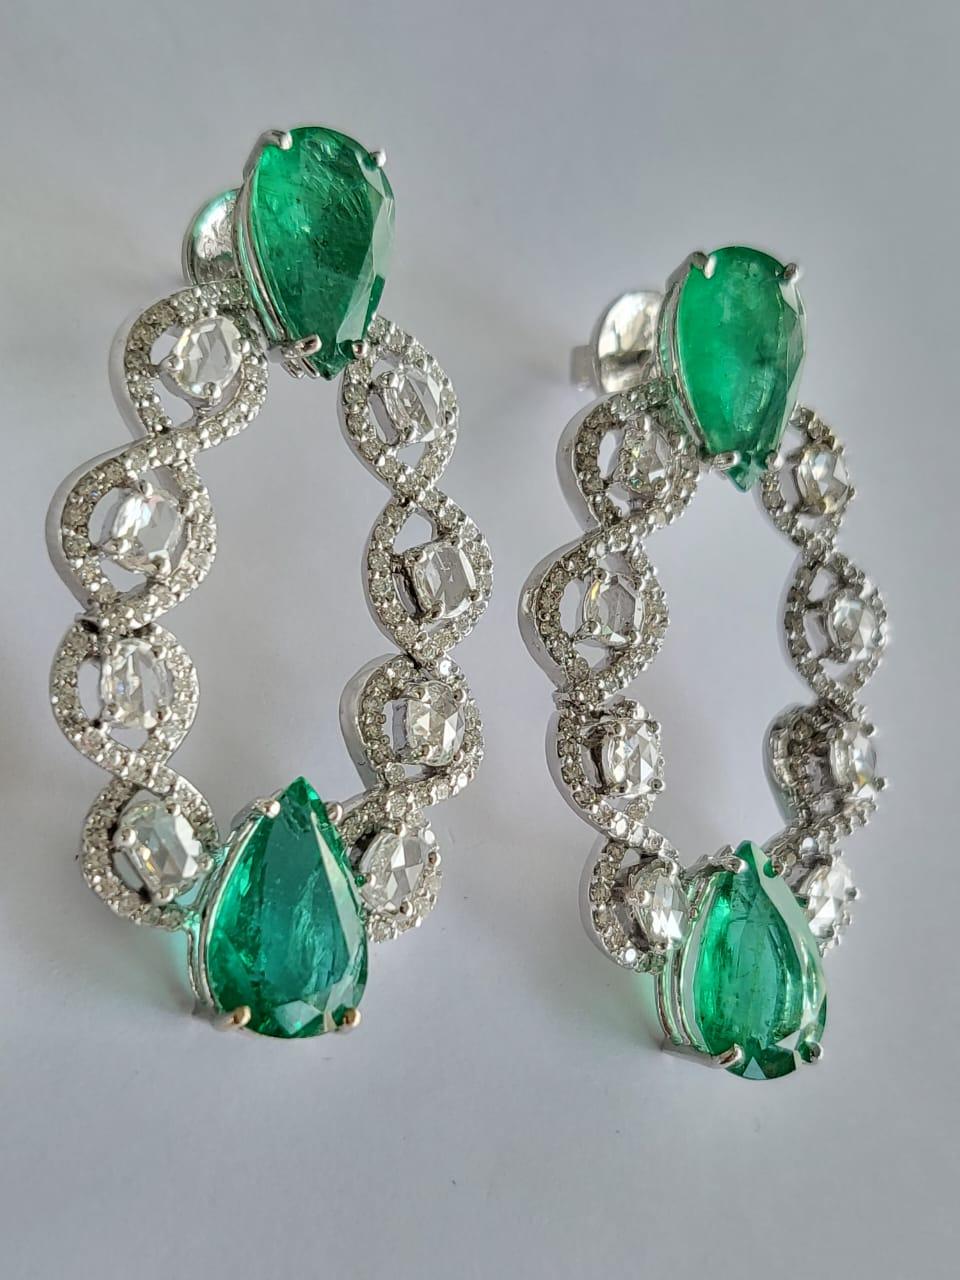 A very gorgeous and modern, Emerald Earrings set in 18K White Gold & Diamonds. The weight of the pear shaped Emeralds are 10.62 carats. The Emeralds are completely natural, without any treatment and is of Zambian origin. The weight of the Rose cut